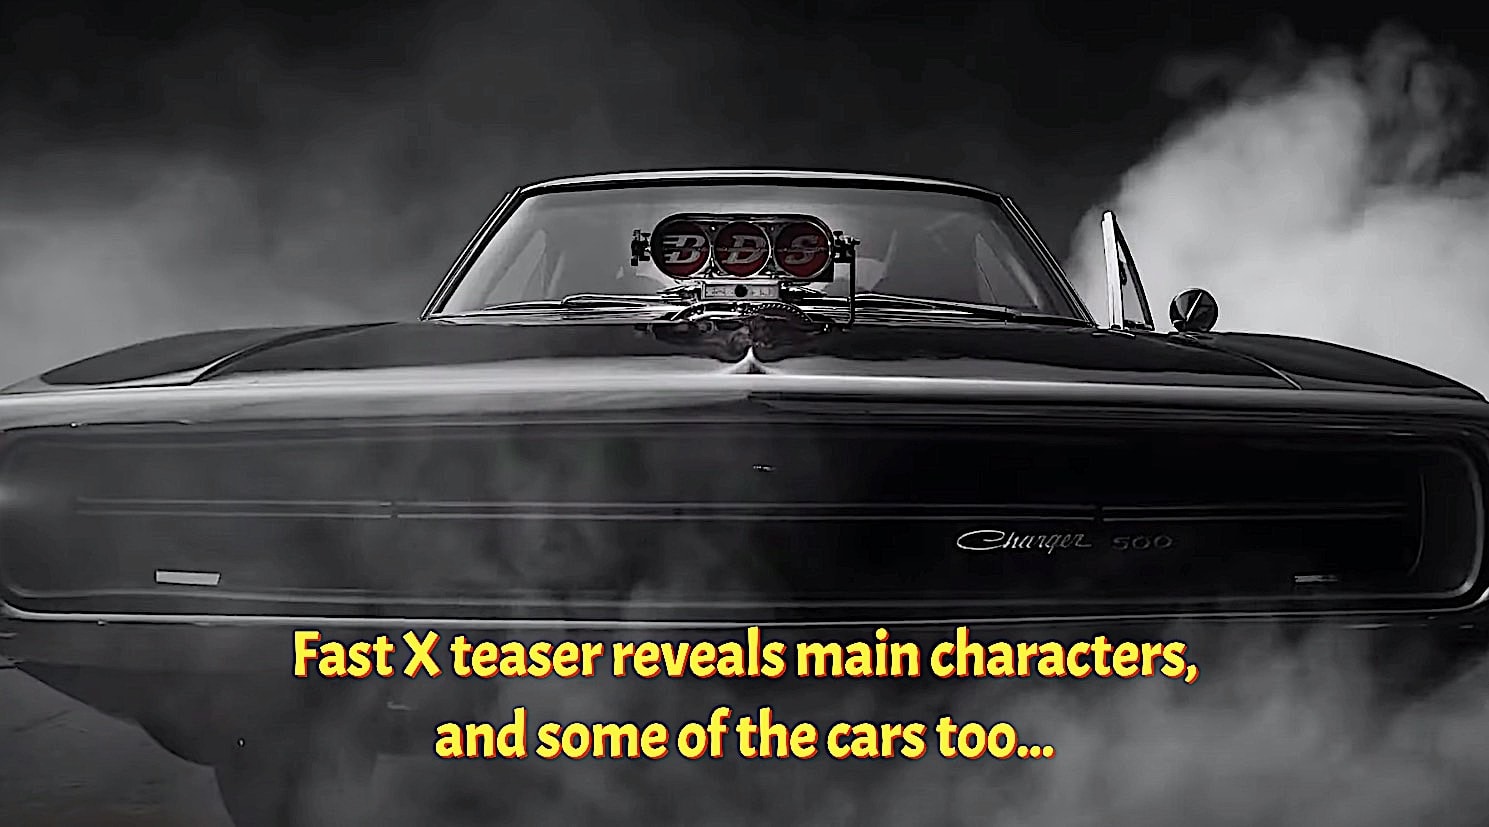 https://s1.cdn.autoevolution.com/images/news/first-fast-and-furious-10-official-teaser-is-out-and-it-reveals-nothing-about-the-plot-210107_1.jpg